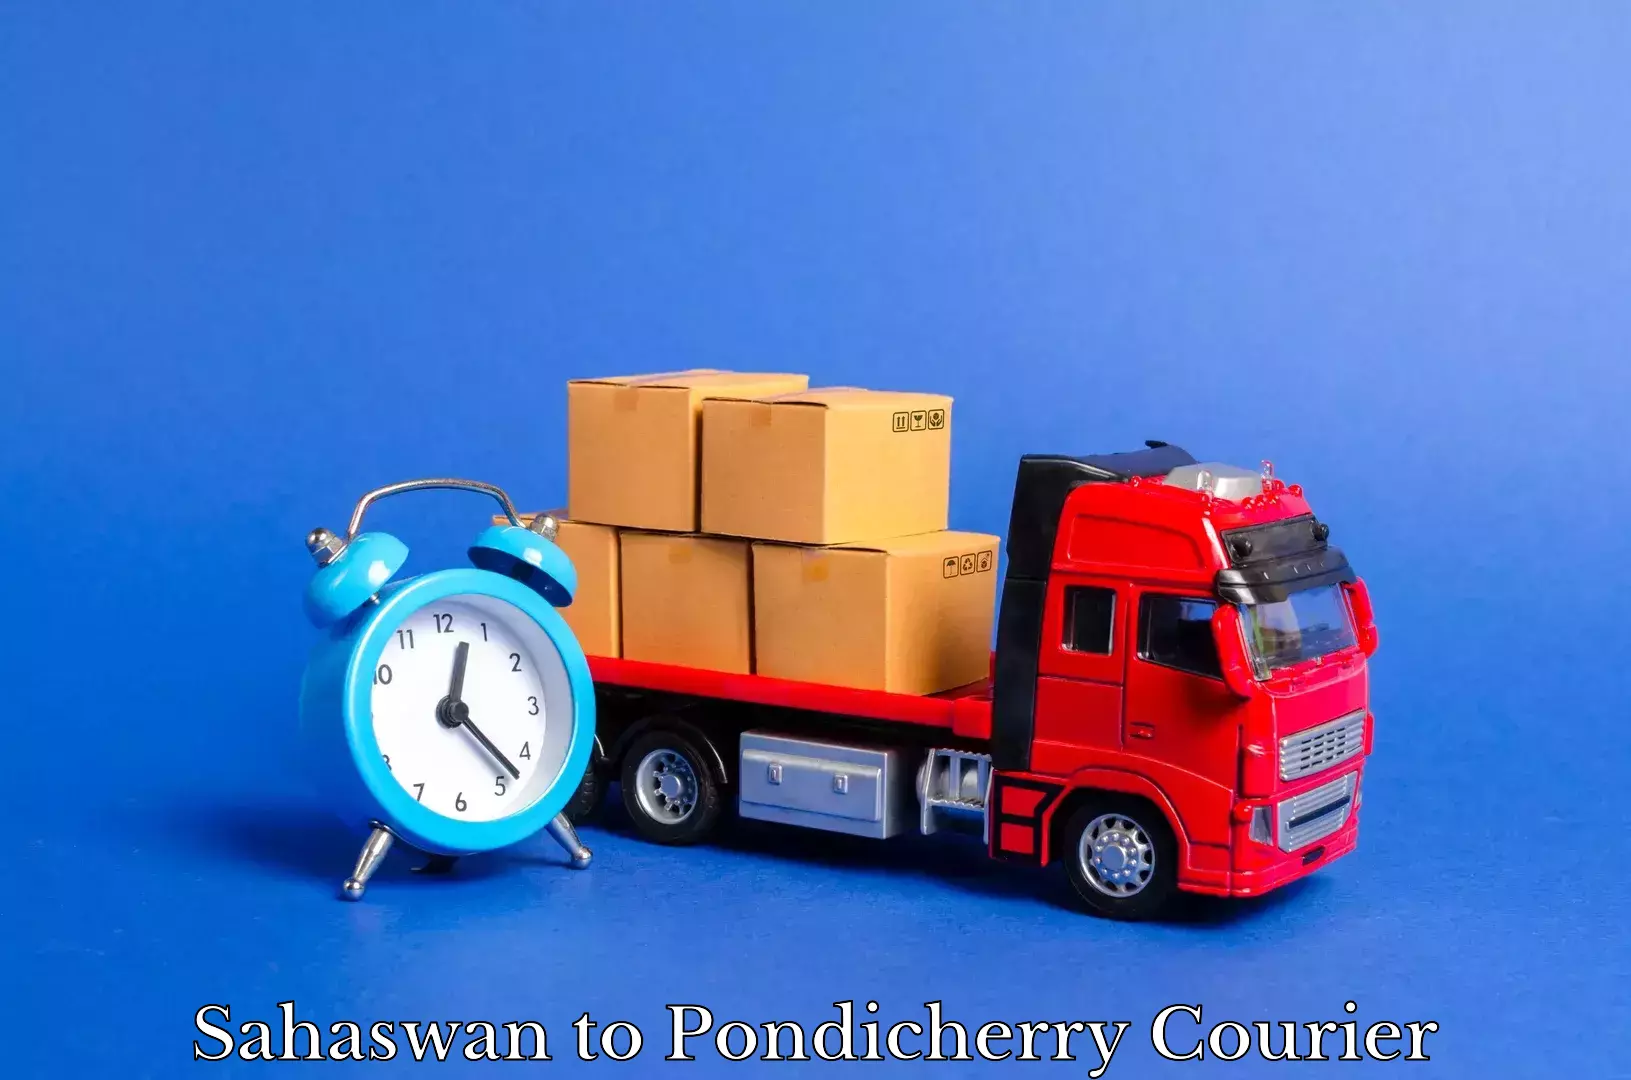 Professional furniture movers in Sahaswan to Pondicherry